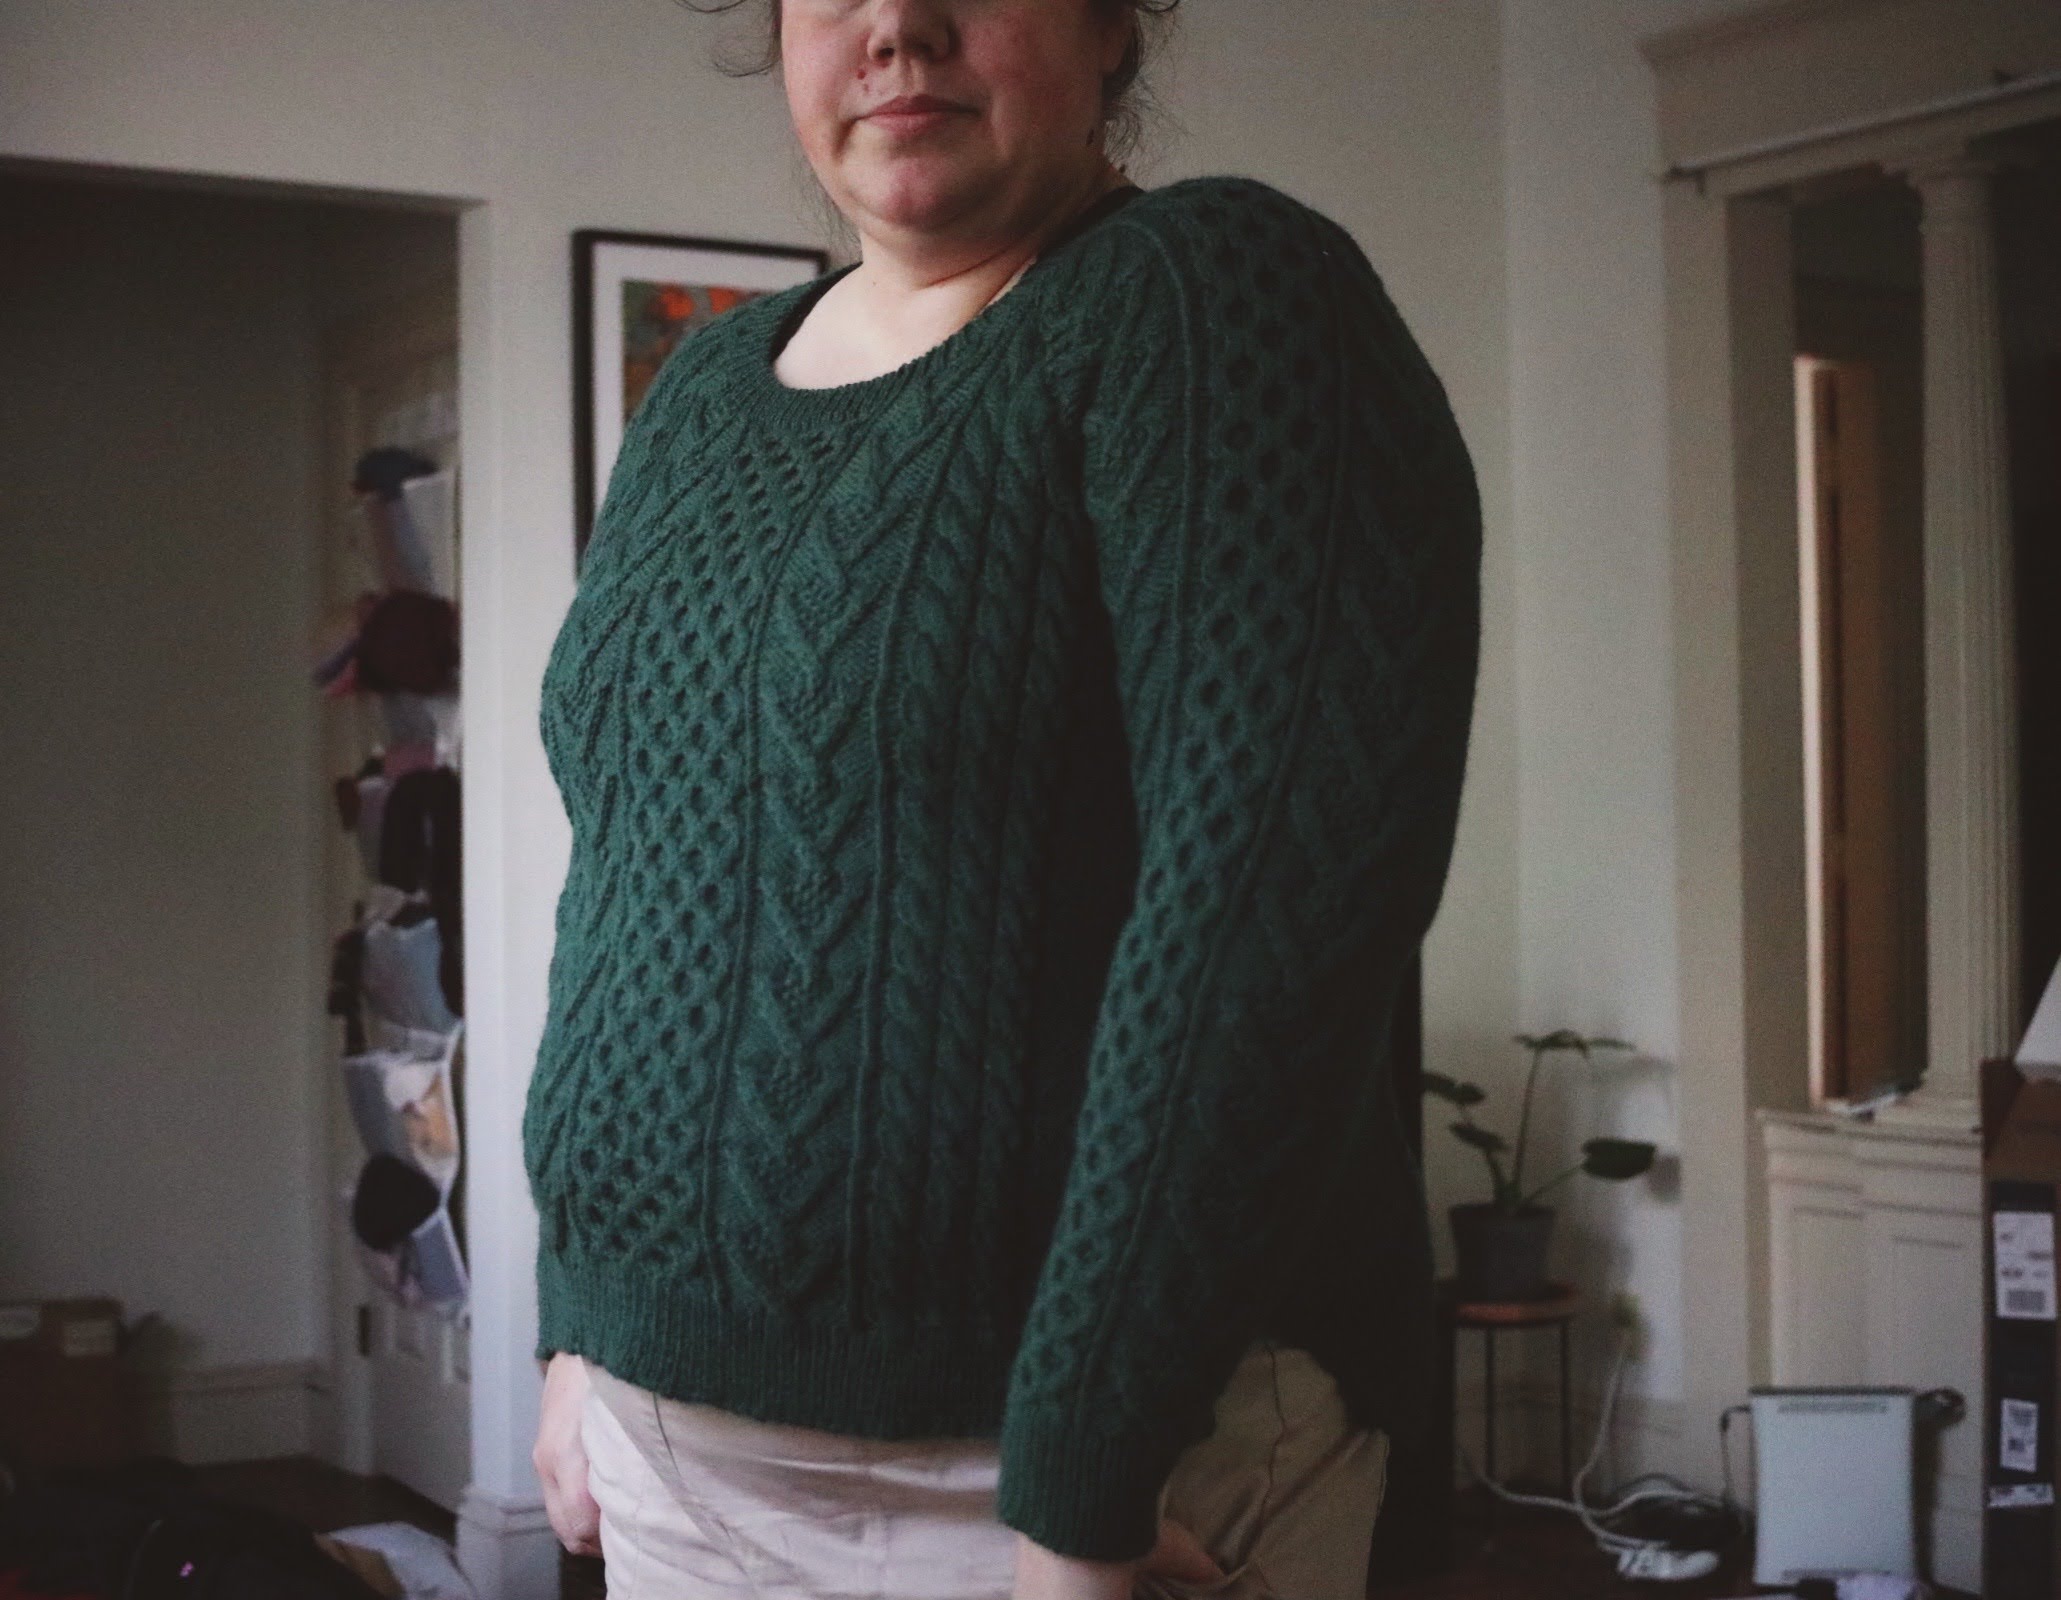 Small-fat woman is modeling a green cabled sweater